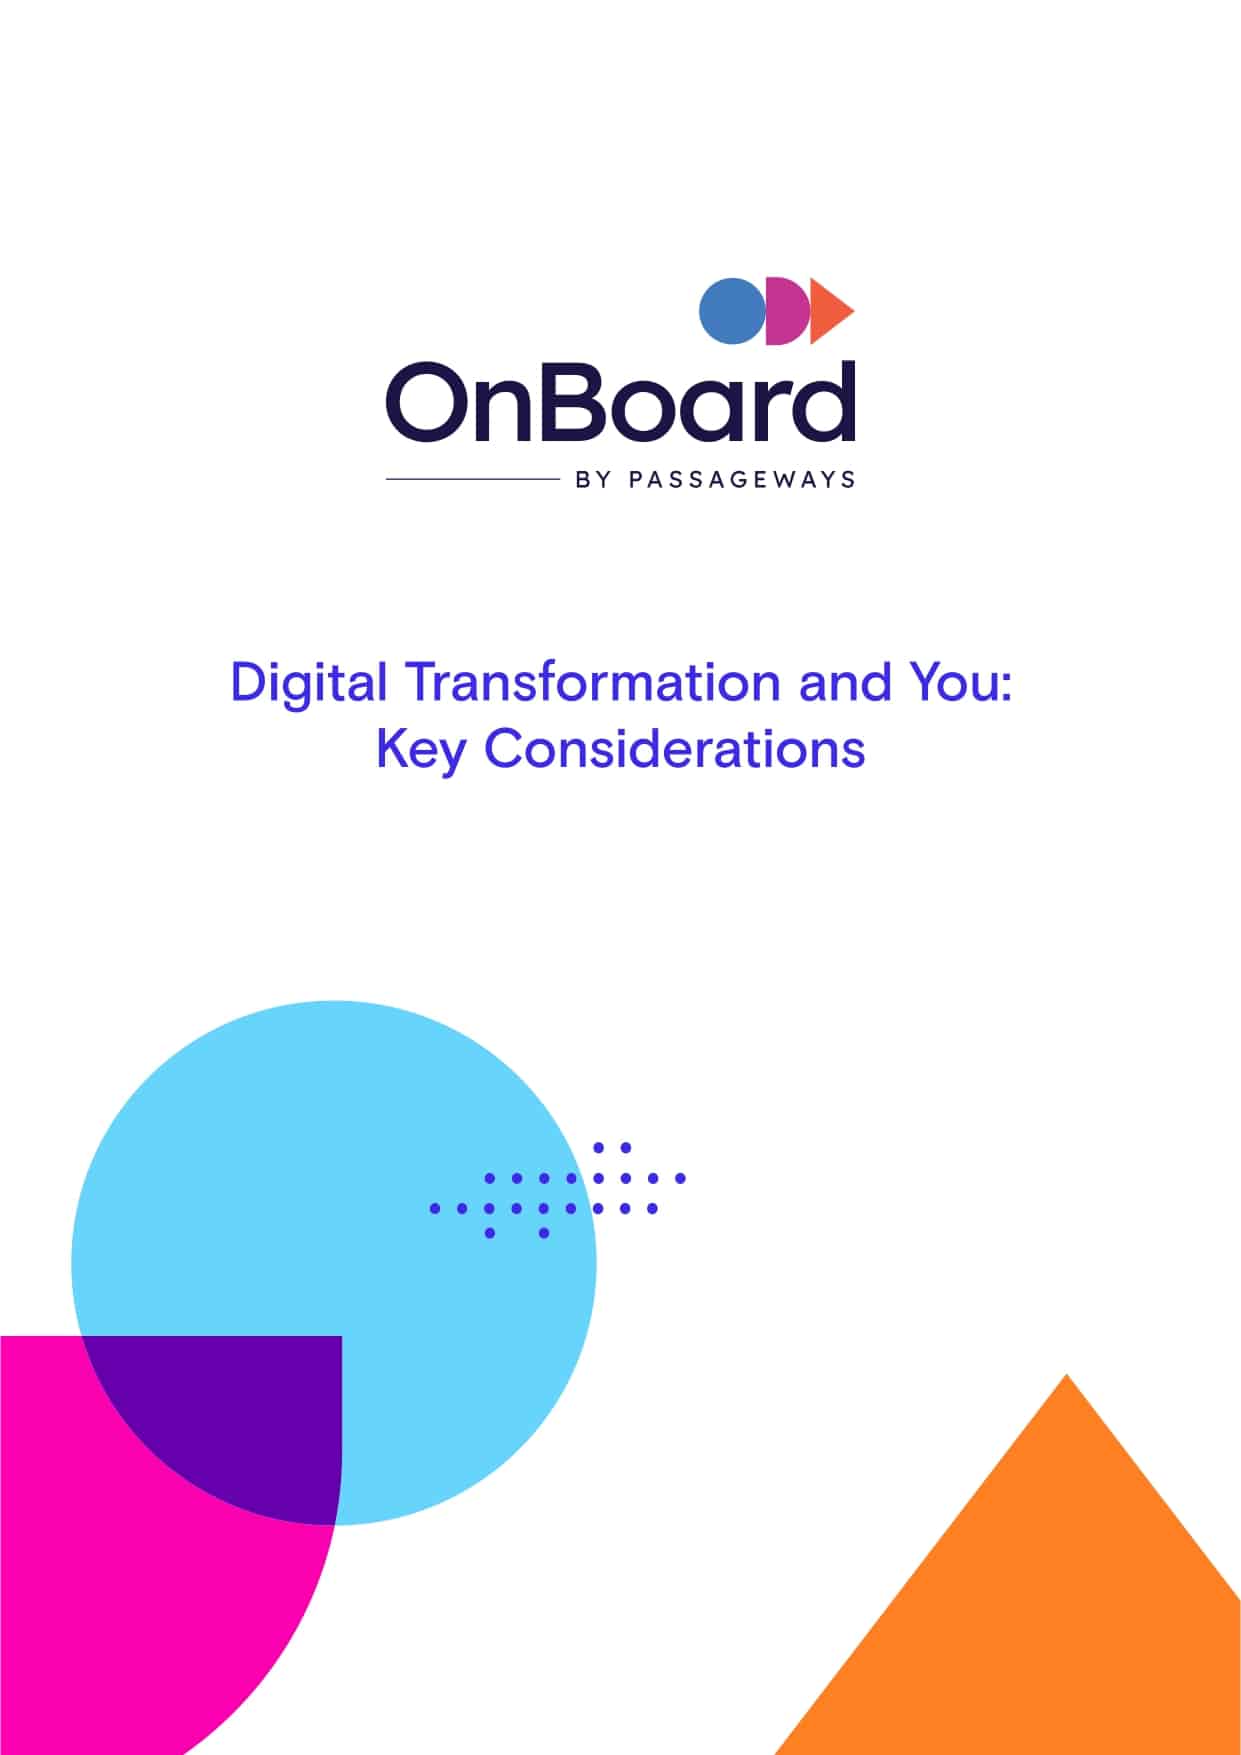 Digital Transformation and Your Board: Key Considerations